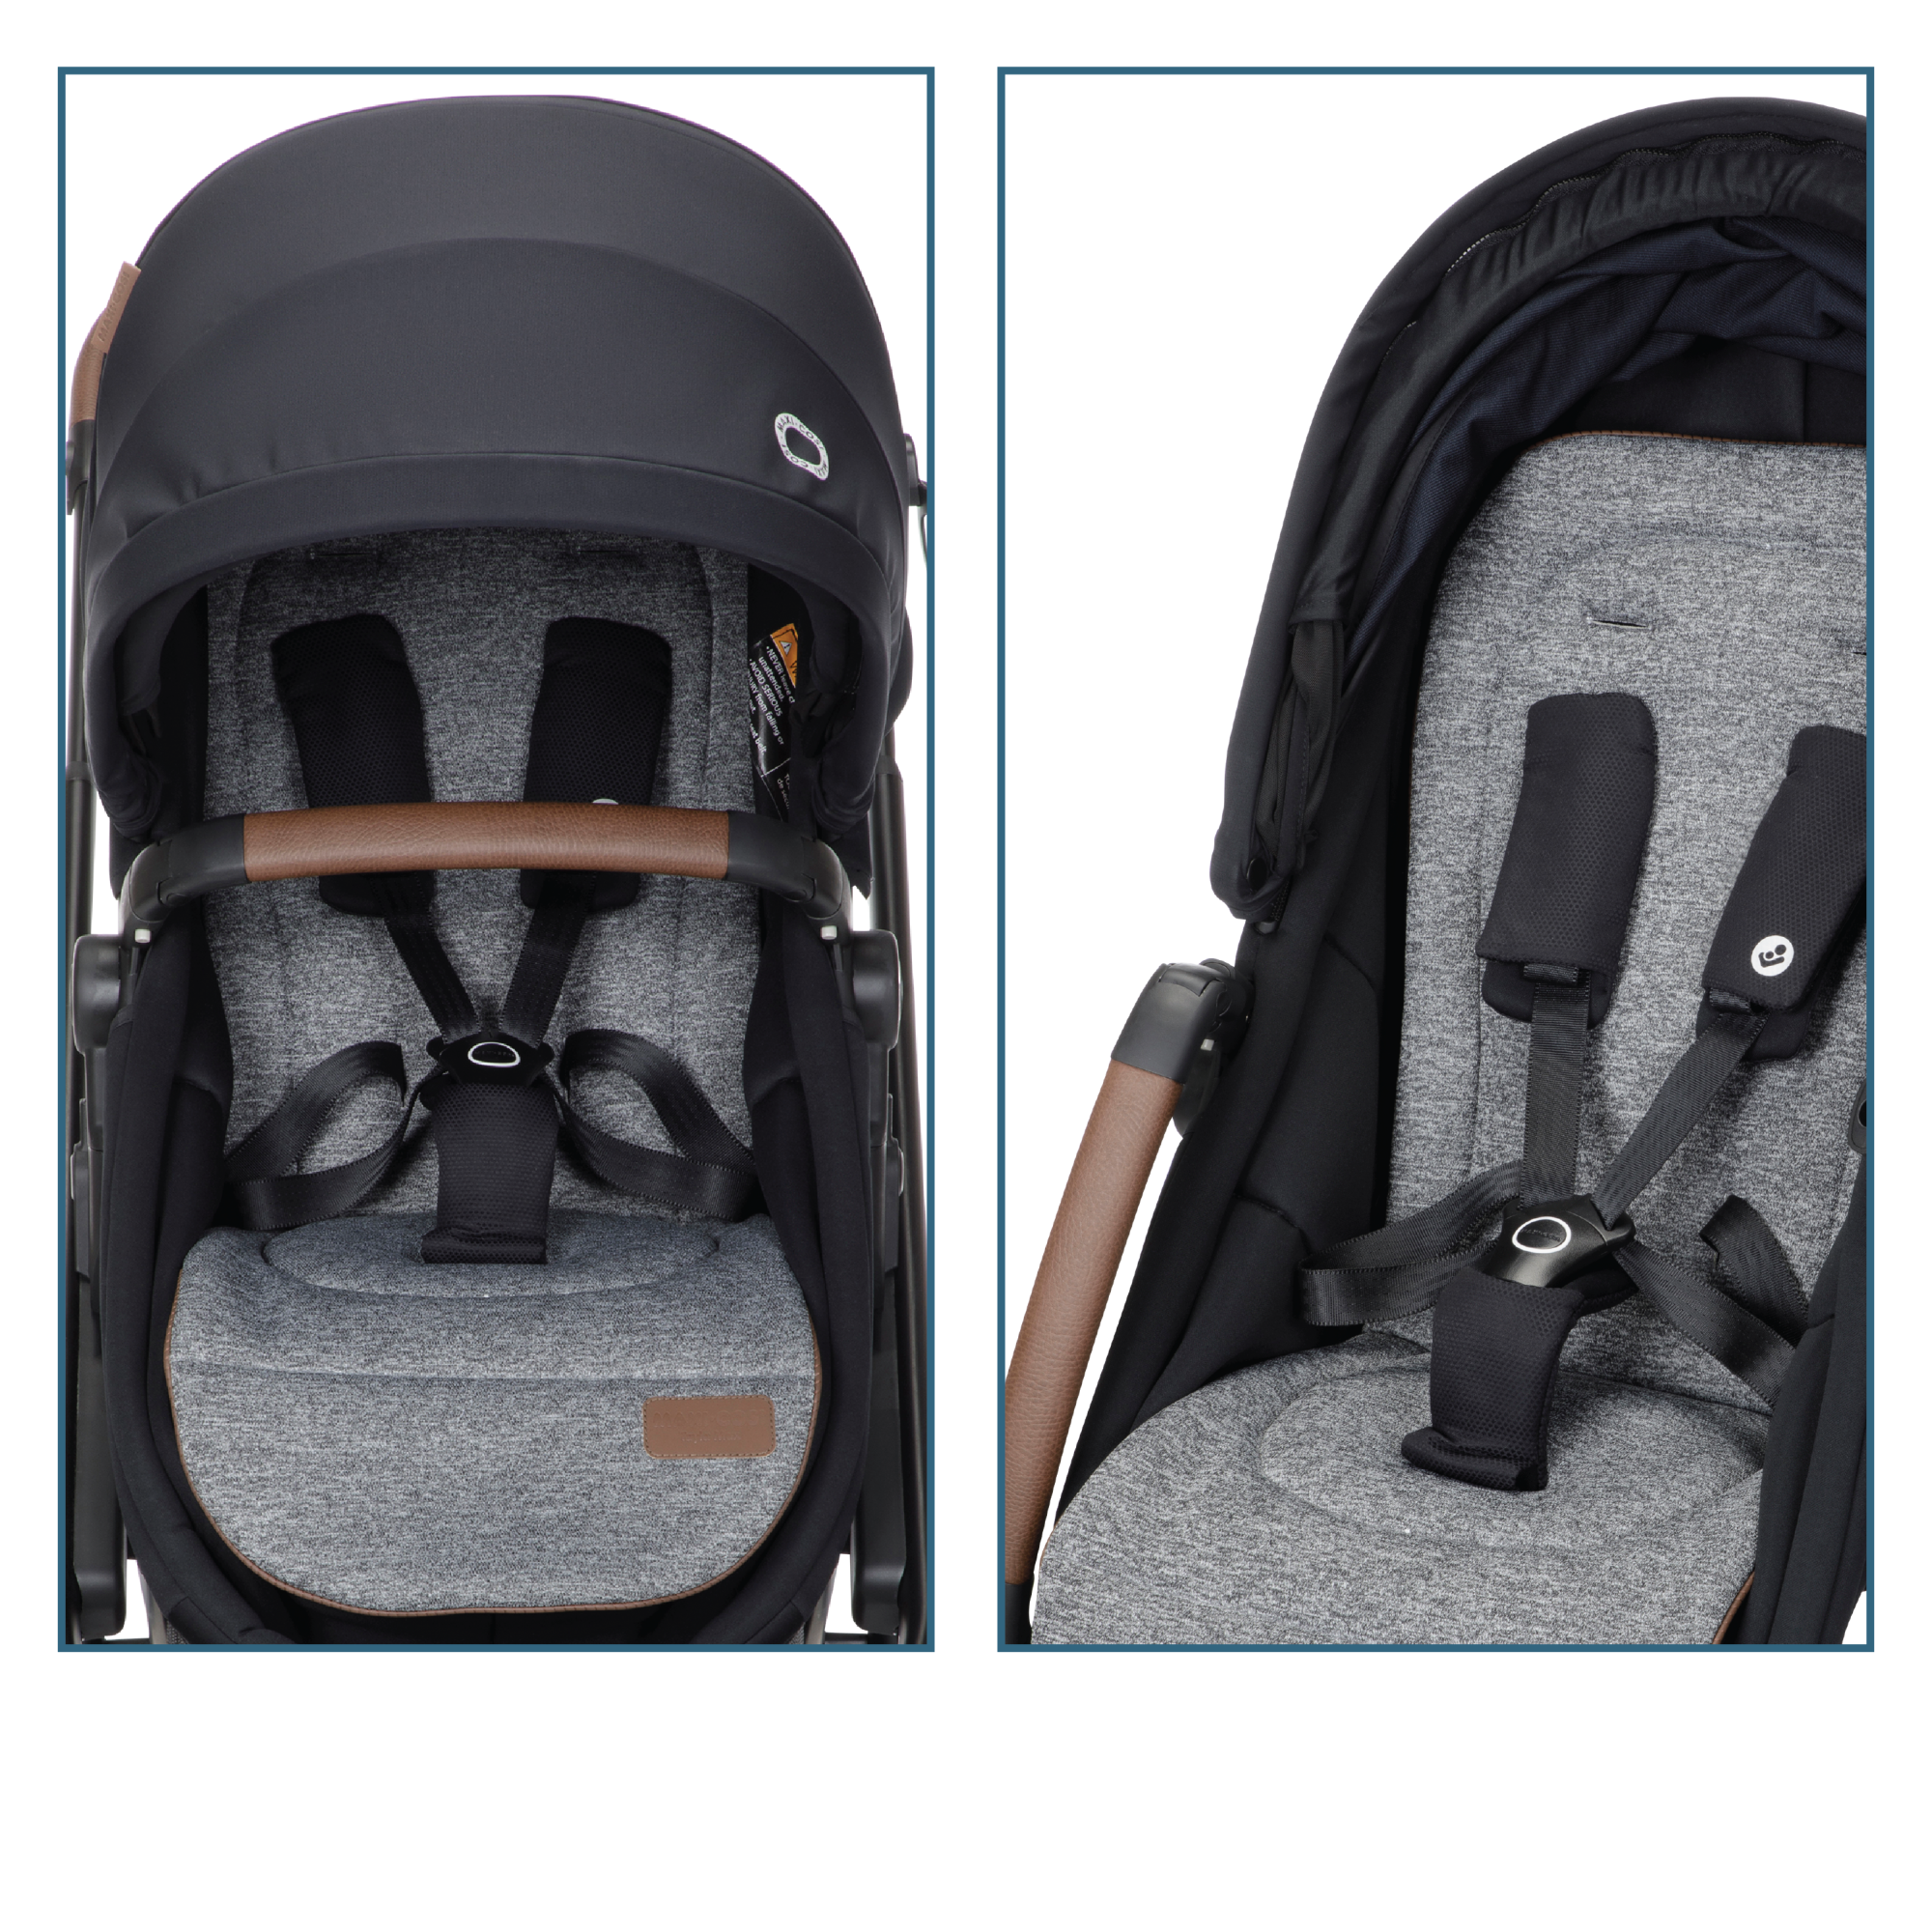 Tayla Max Modular Stroller - Onyx Wonder - bumper bar swings to the side for easy access